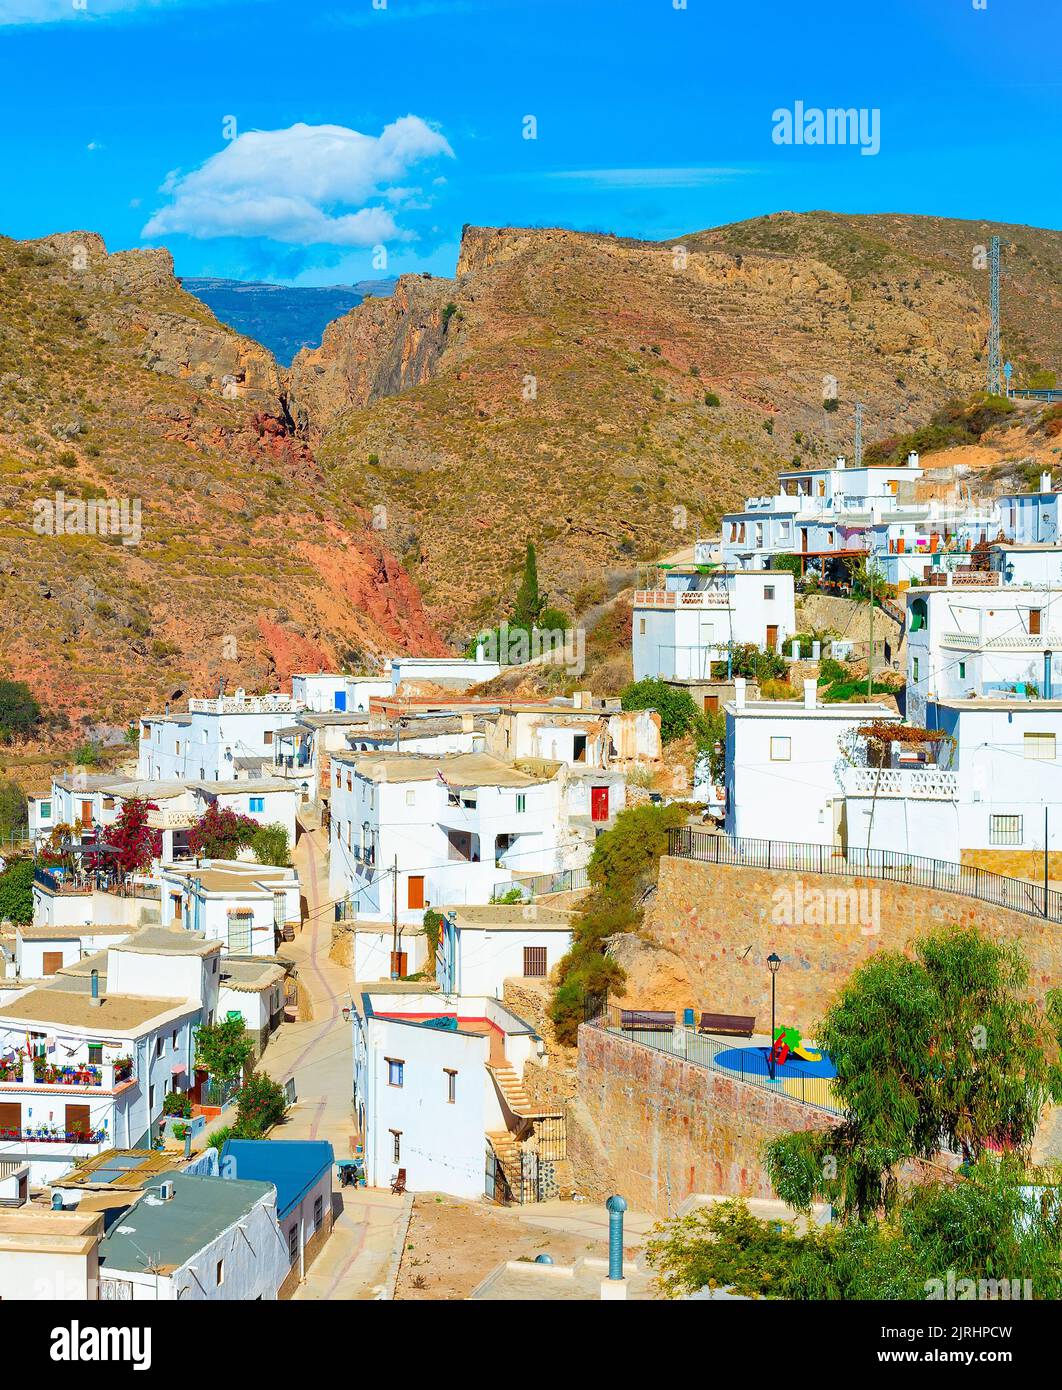 Sunny townscape of Cartagena residential area among mountains, Spain Stock Photo